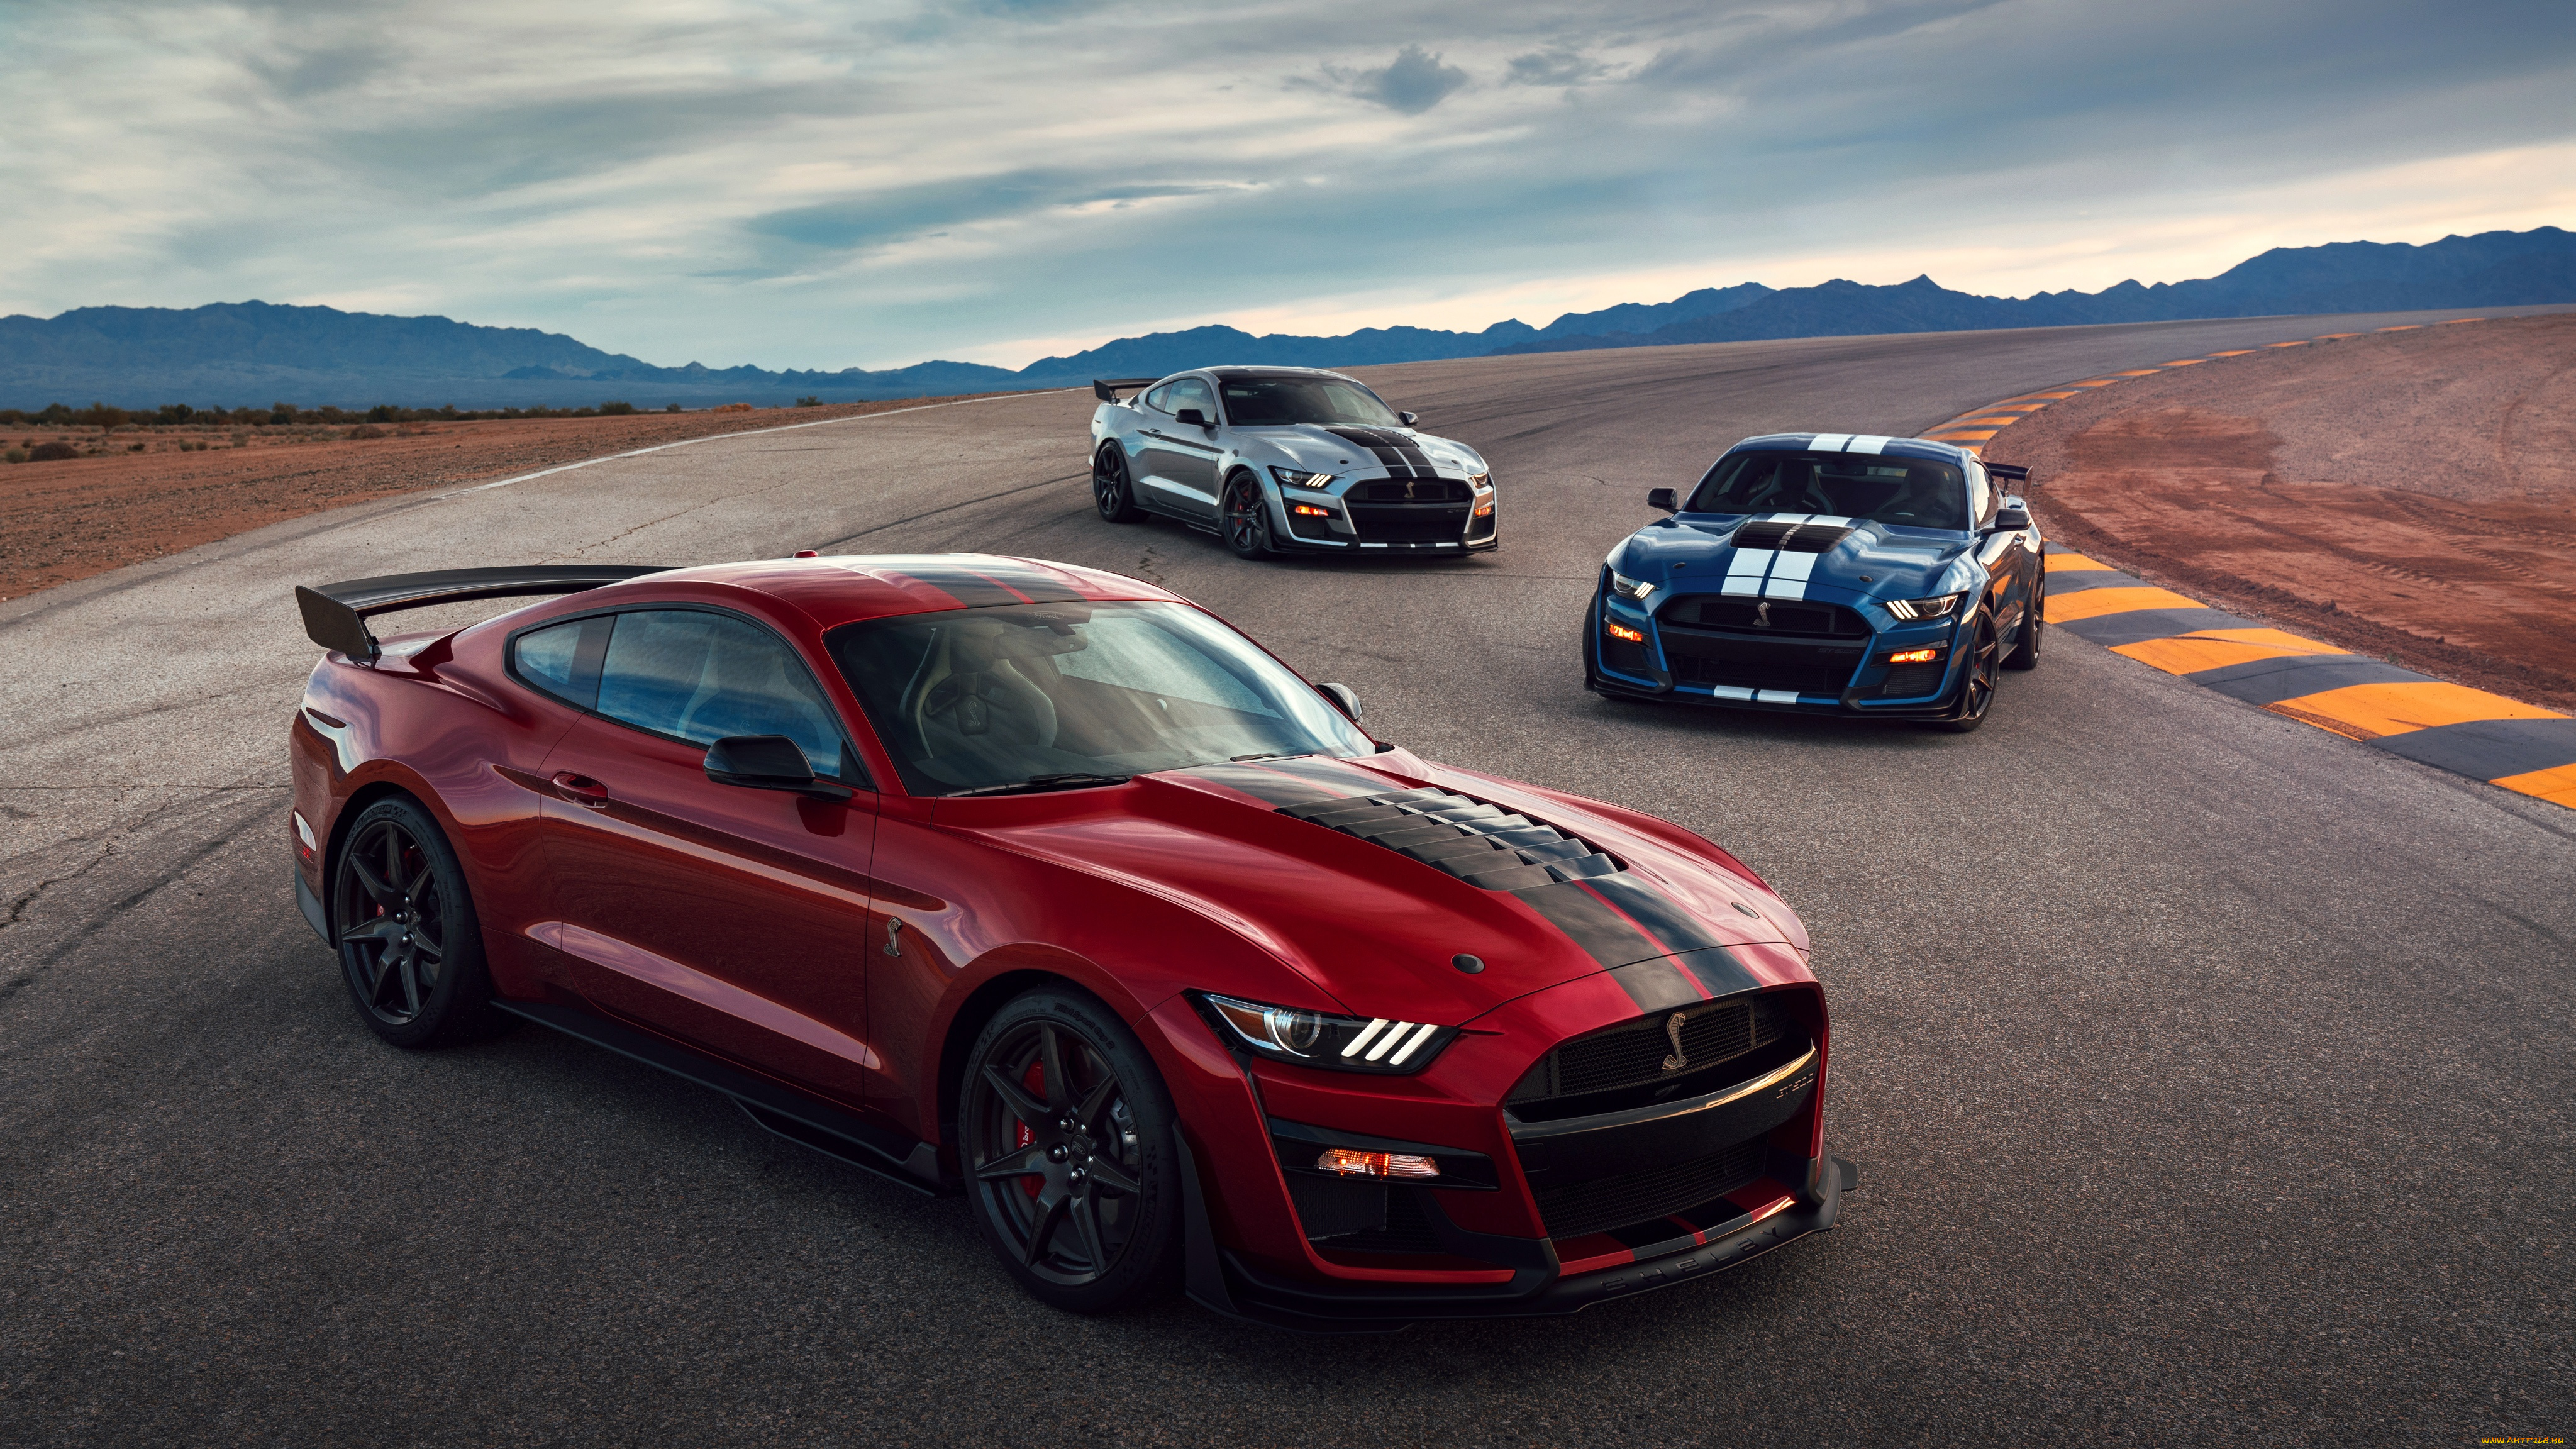 2020, ford, mustang, shelby, gt500, автомобили, mustang, shelby, ford, купе, форд, трек, gt500, 2020